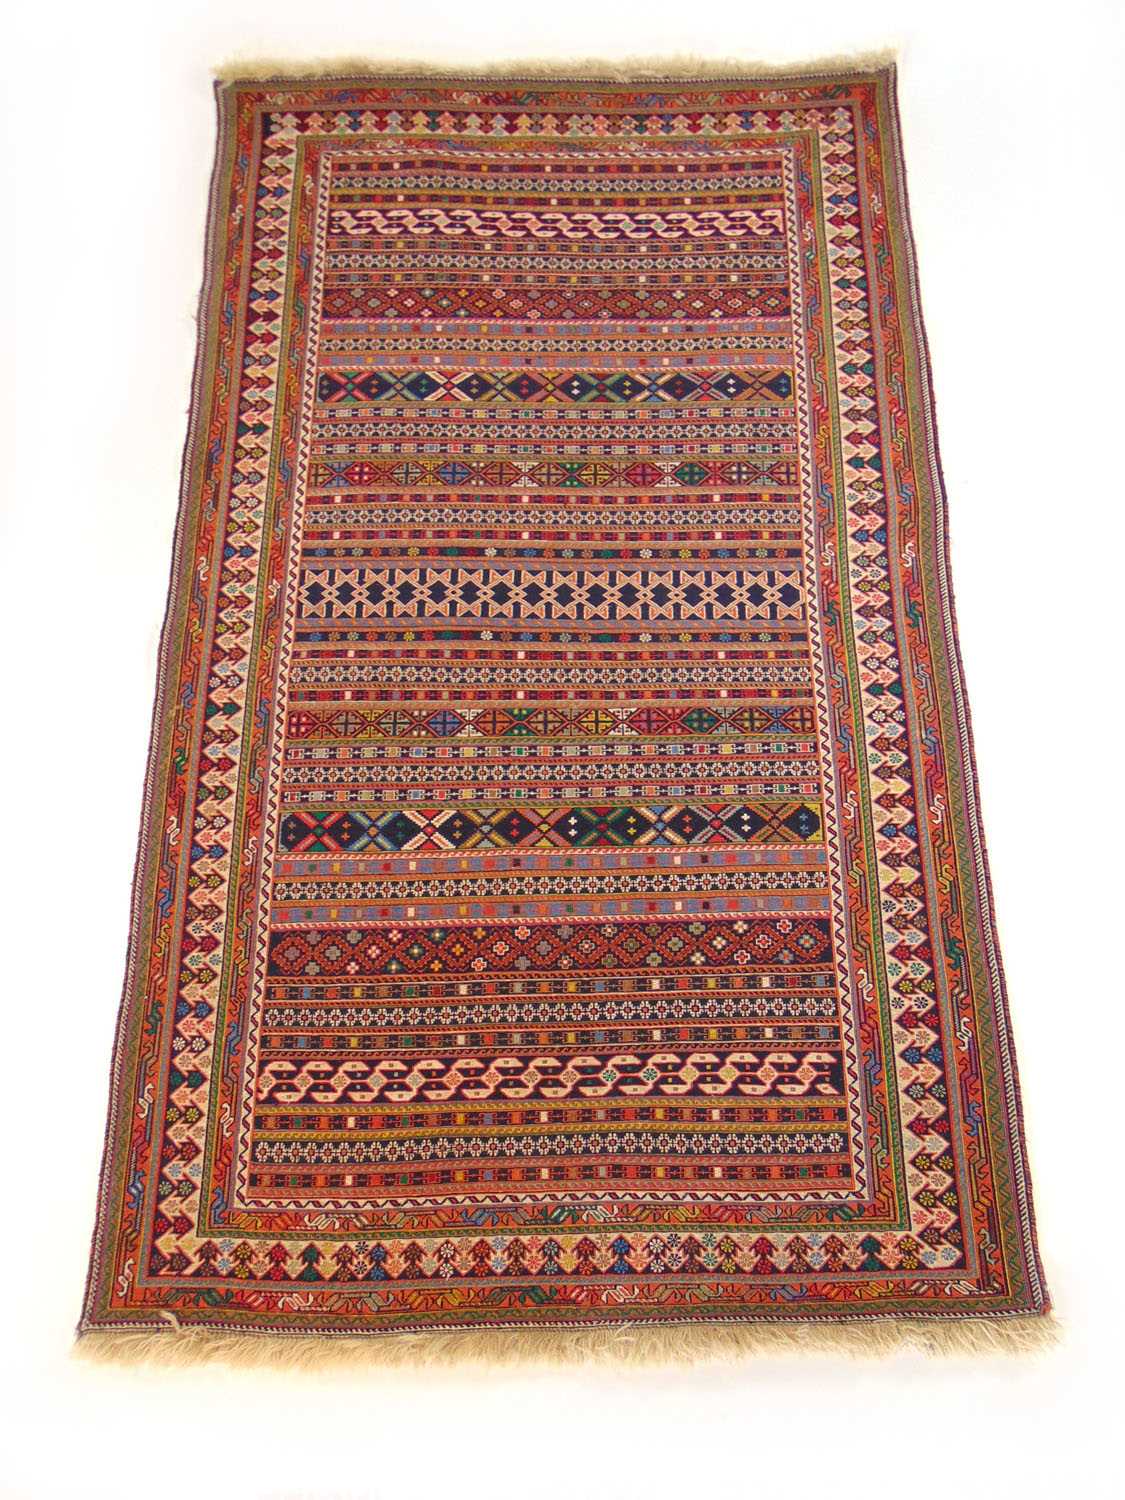 A handwoven Persian (?) rug, the multi line border surrounding the striped field, 214 cm x 128 cm - Image 2 of 2